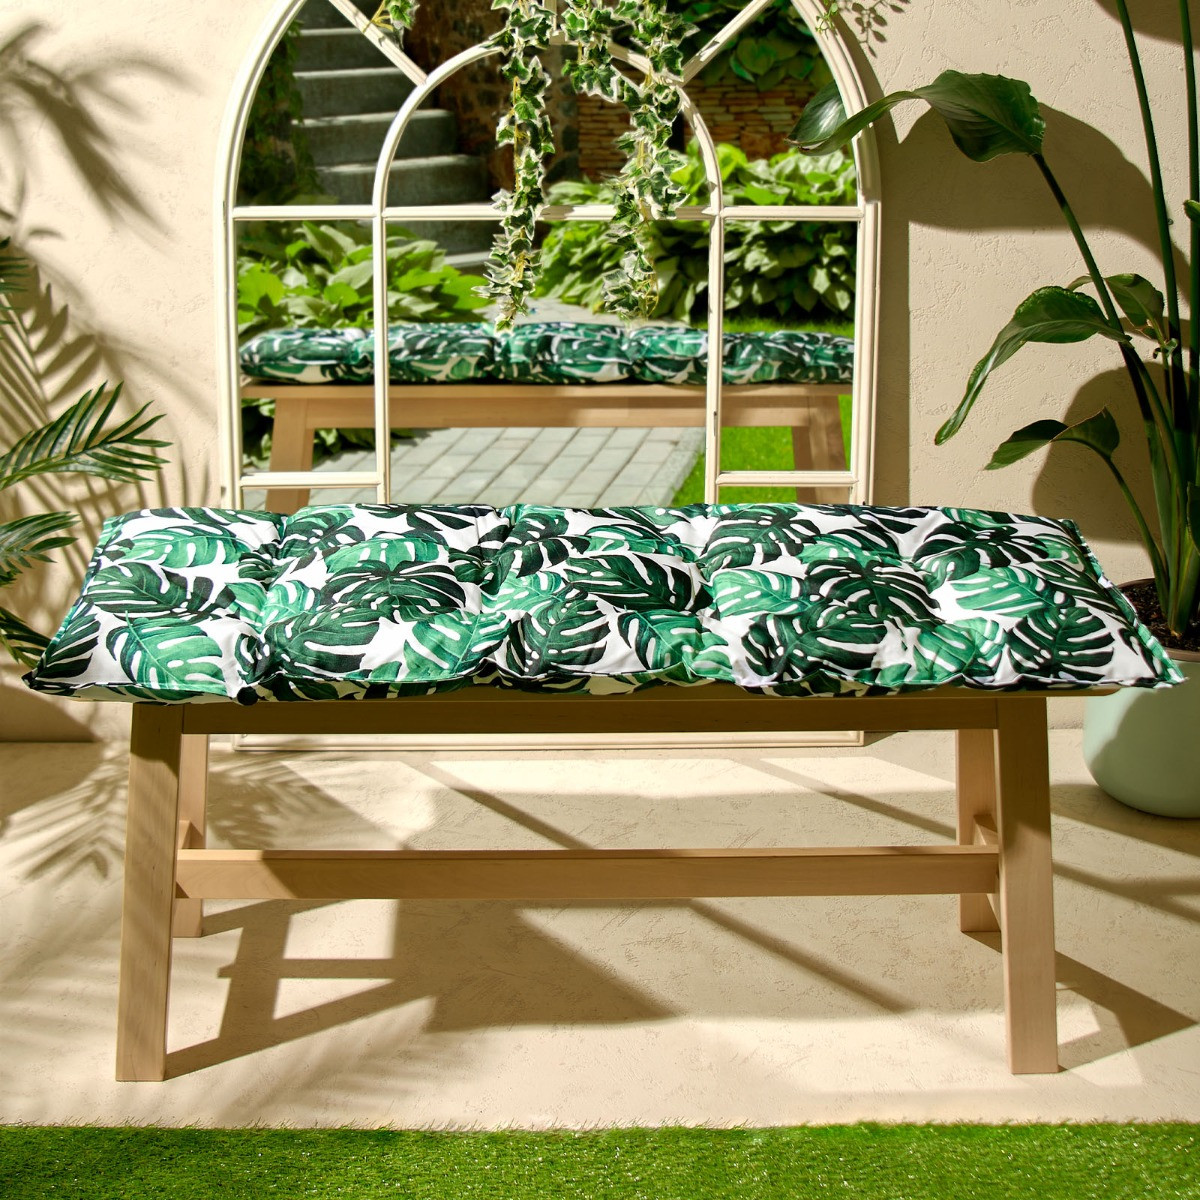 OHS 2 Seater Leaf Print Water Resistant Bench Pad, 110cm x 40cm - Green/White>